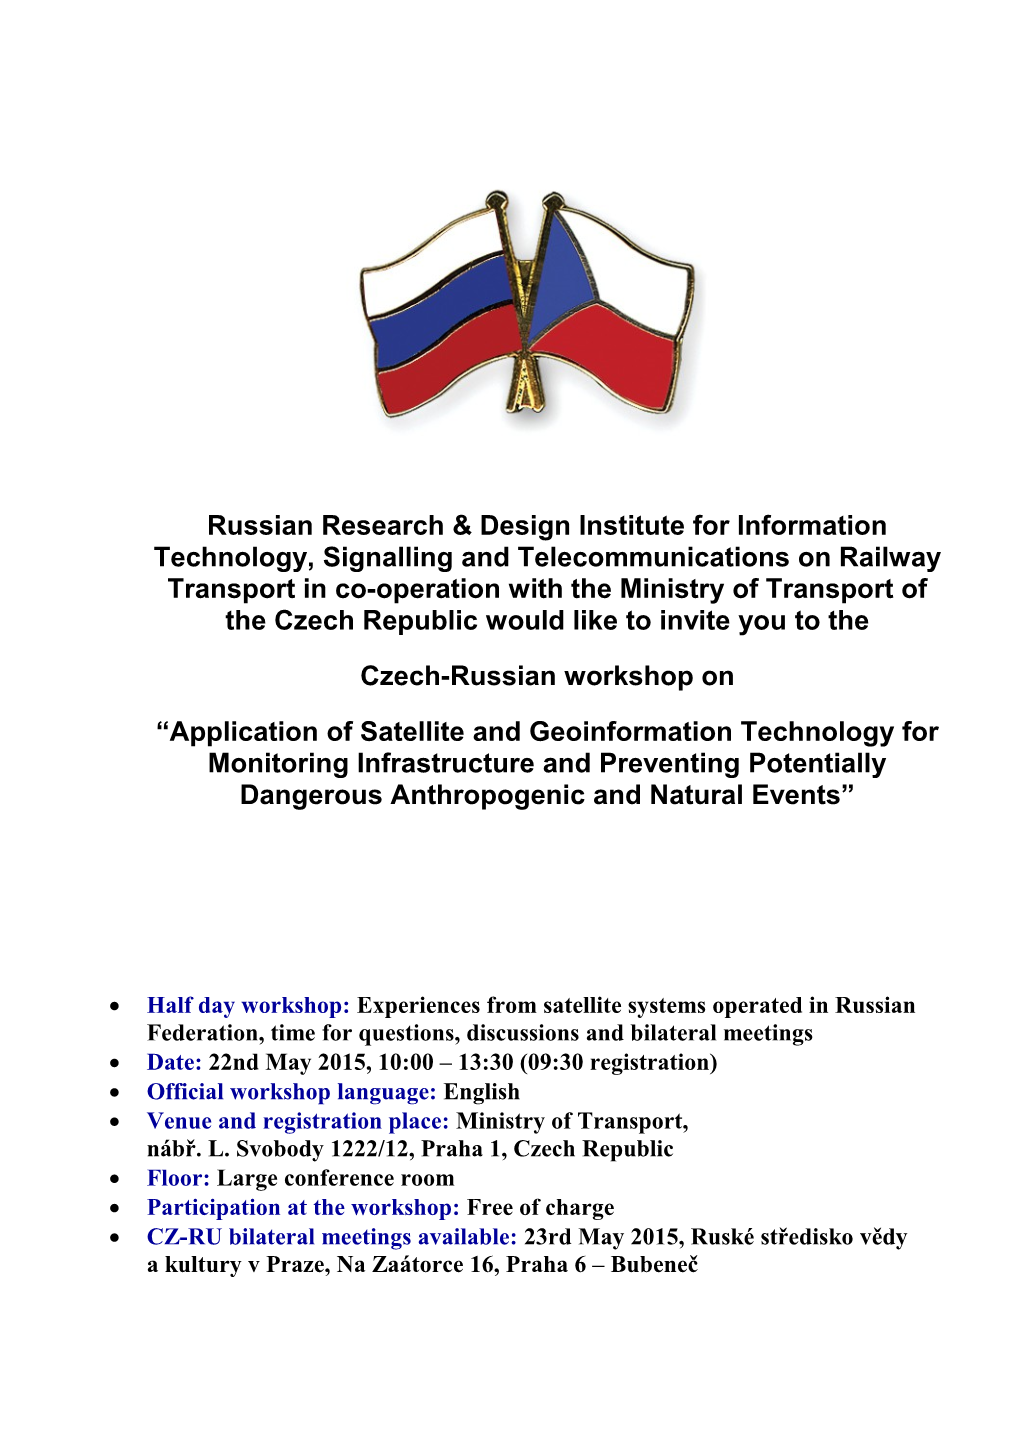 Russian Research & Design Institute for Information Technology, Signalling And